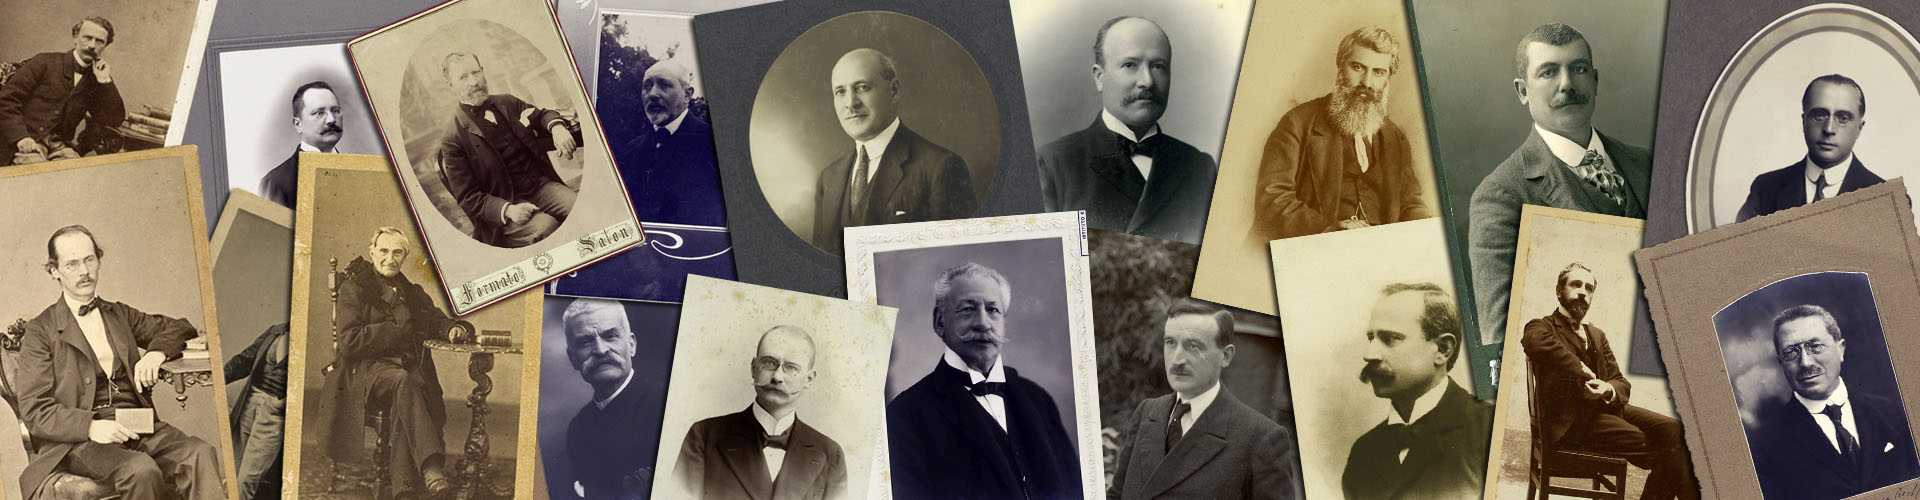 Portraits of physicians and scientists